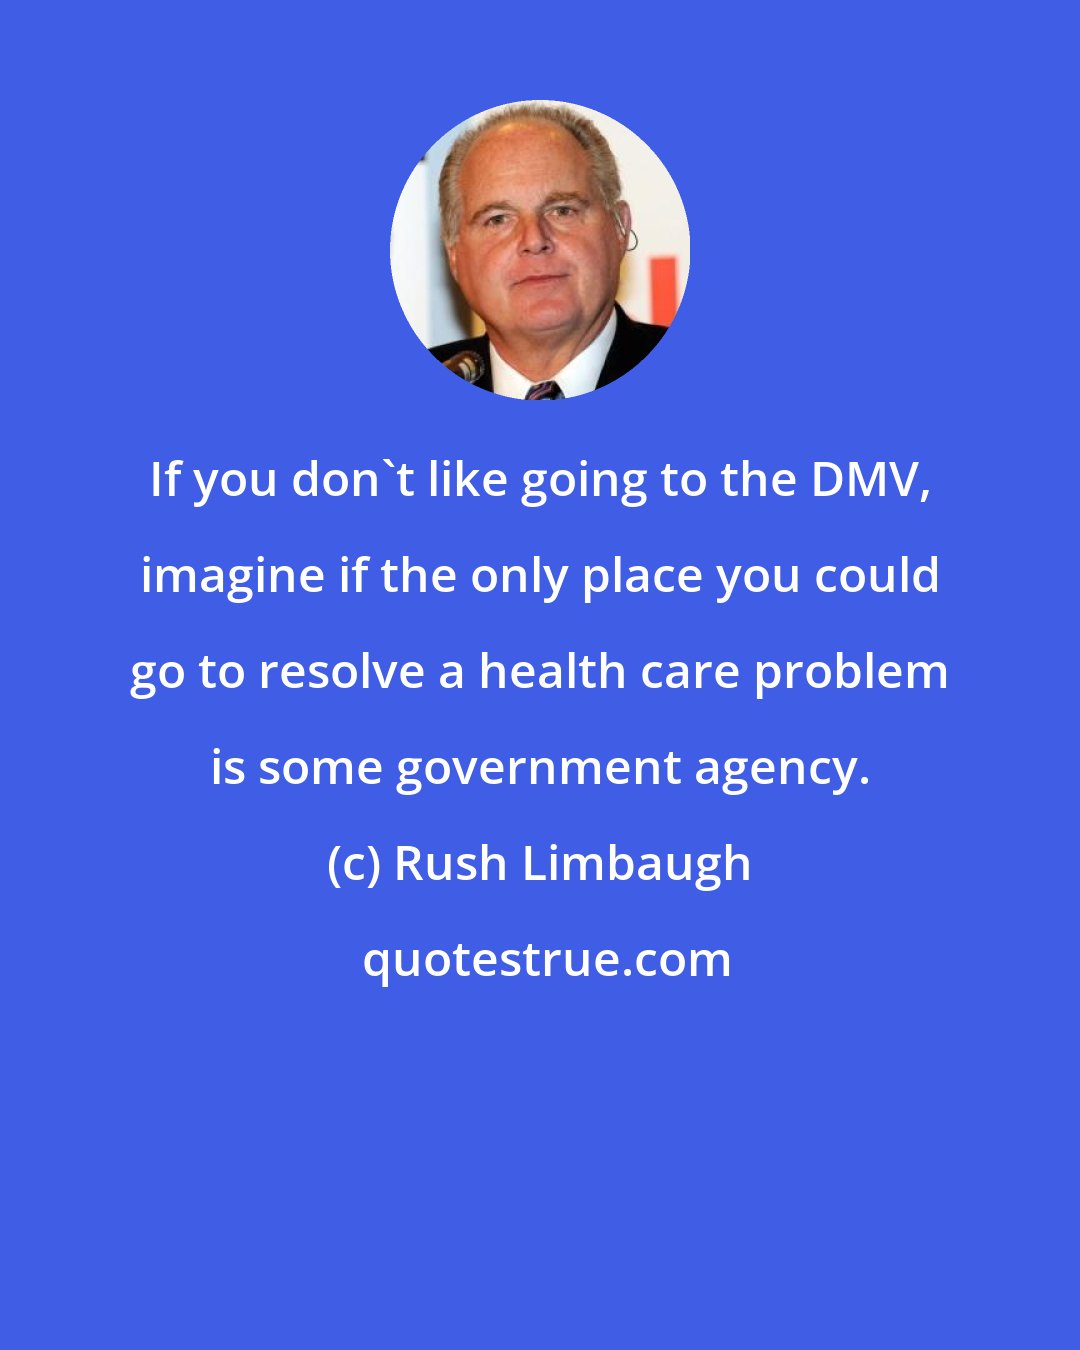 Rush Limbaugh: If you don't like going to the DMV, imagine if the only place you could go to resolve a health care problem is some government agency.